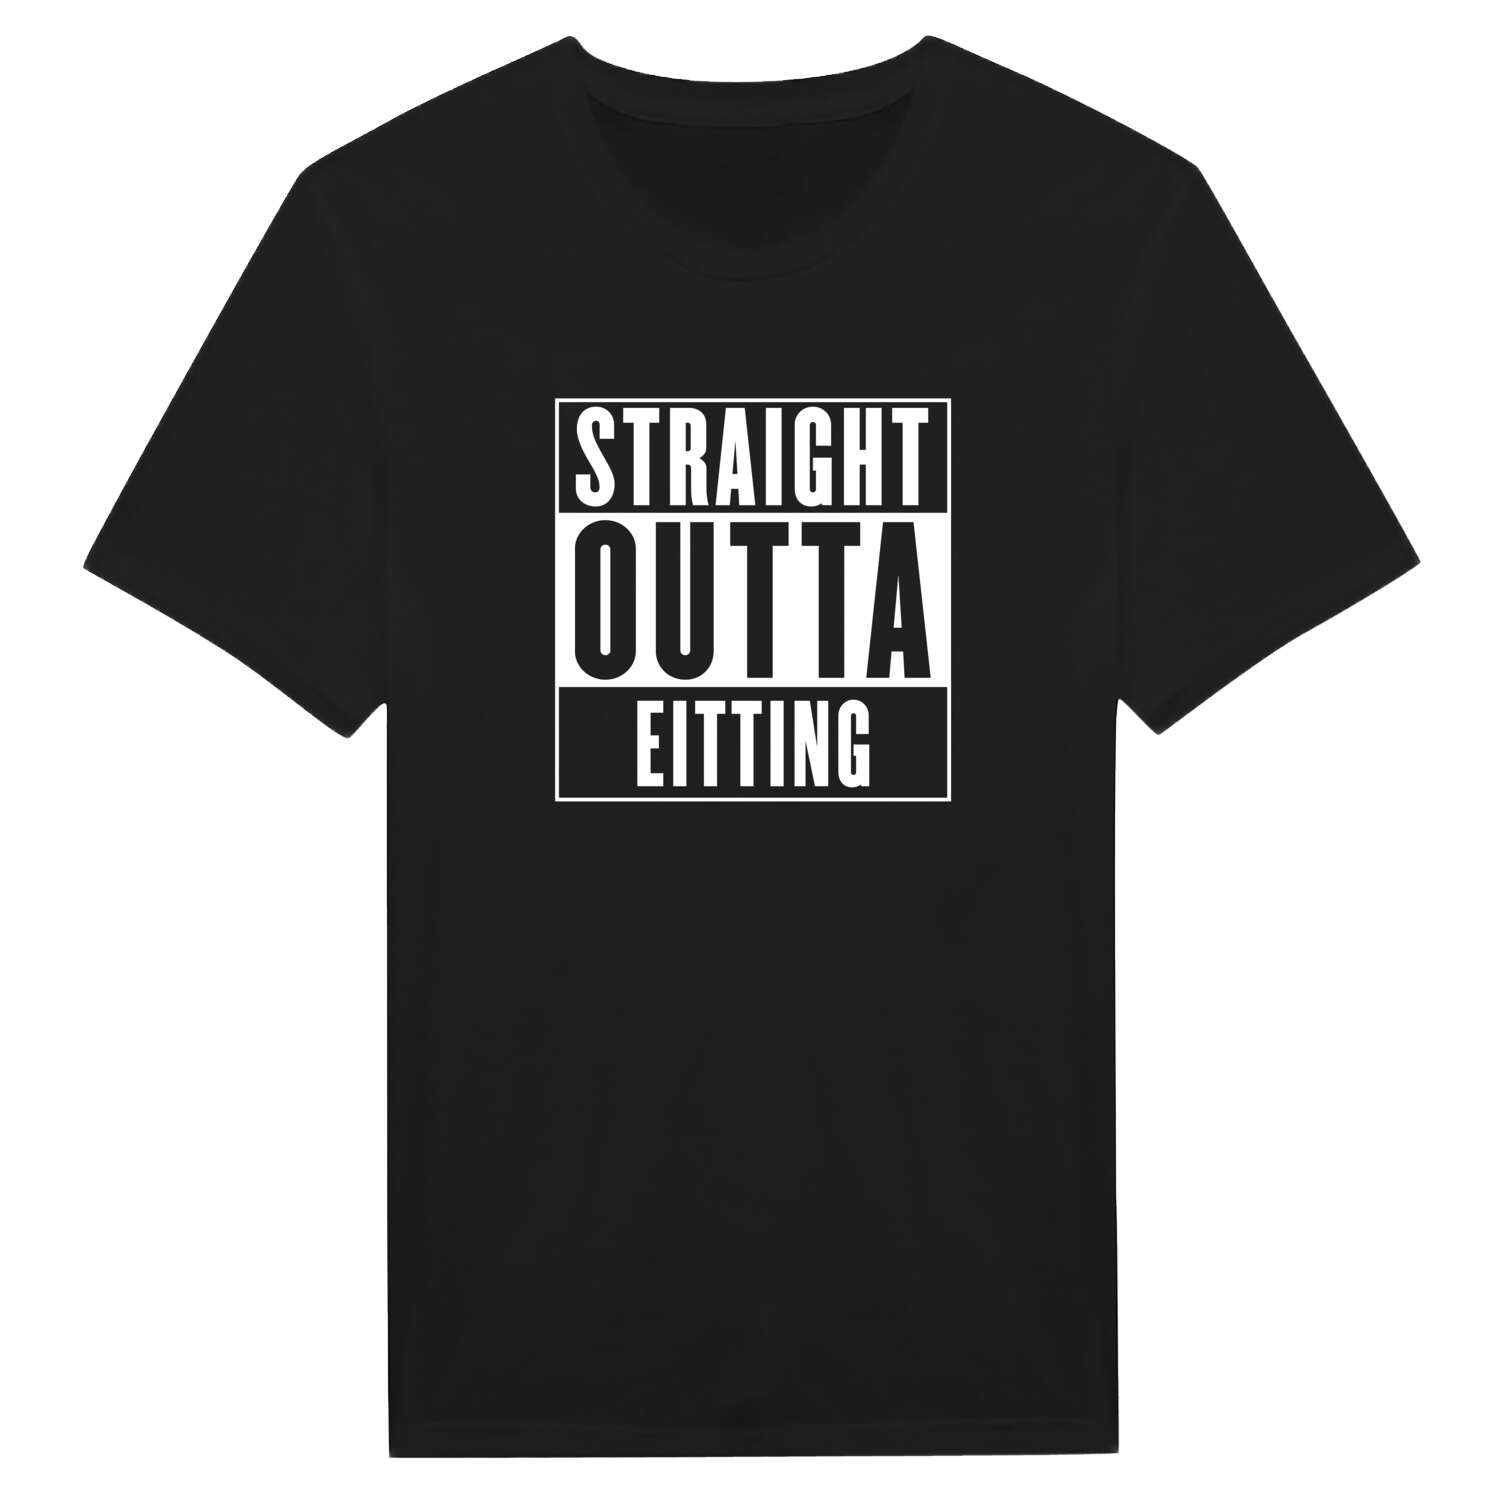 Eitting T-Shirt »Straight Outta«